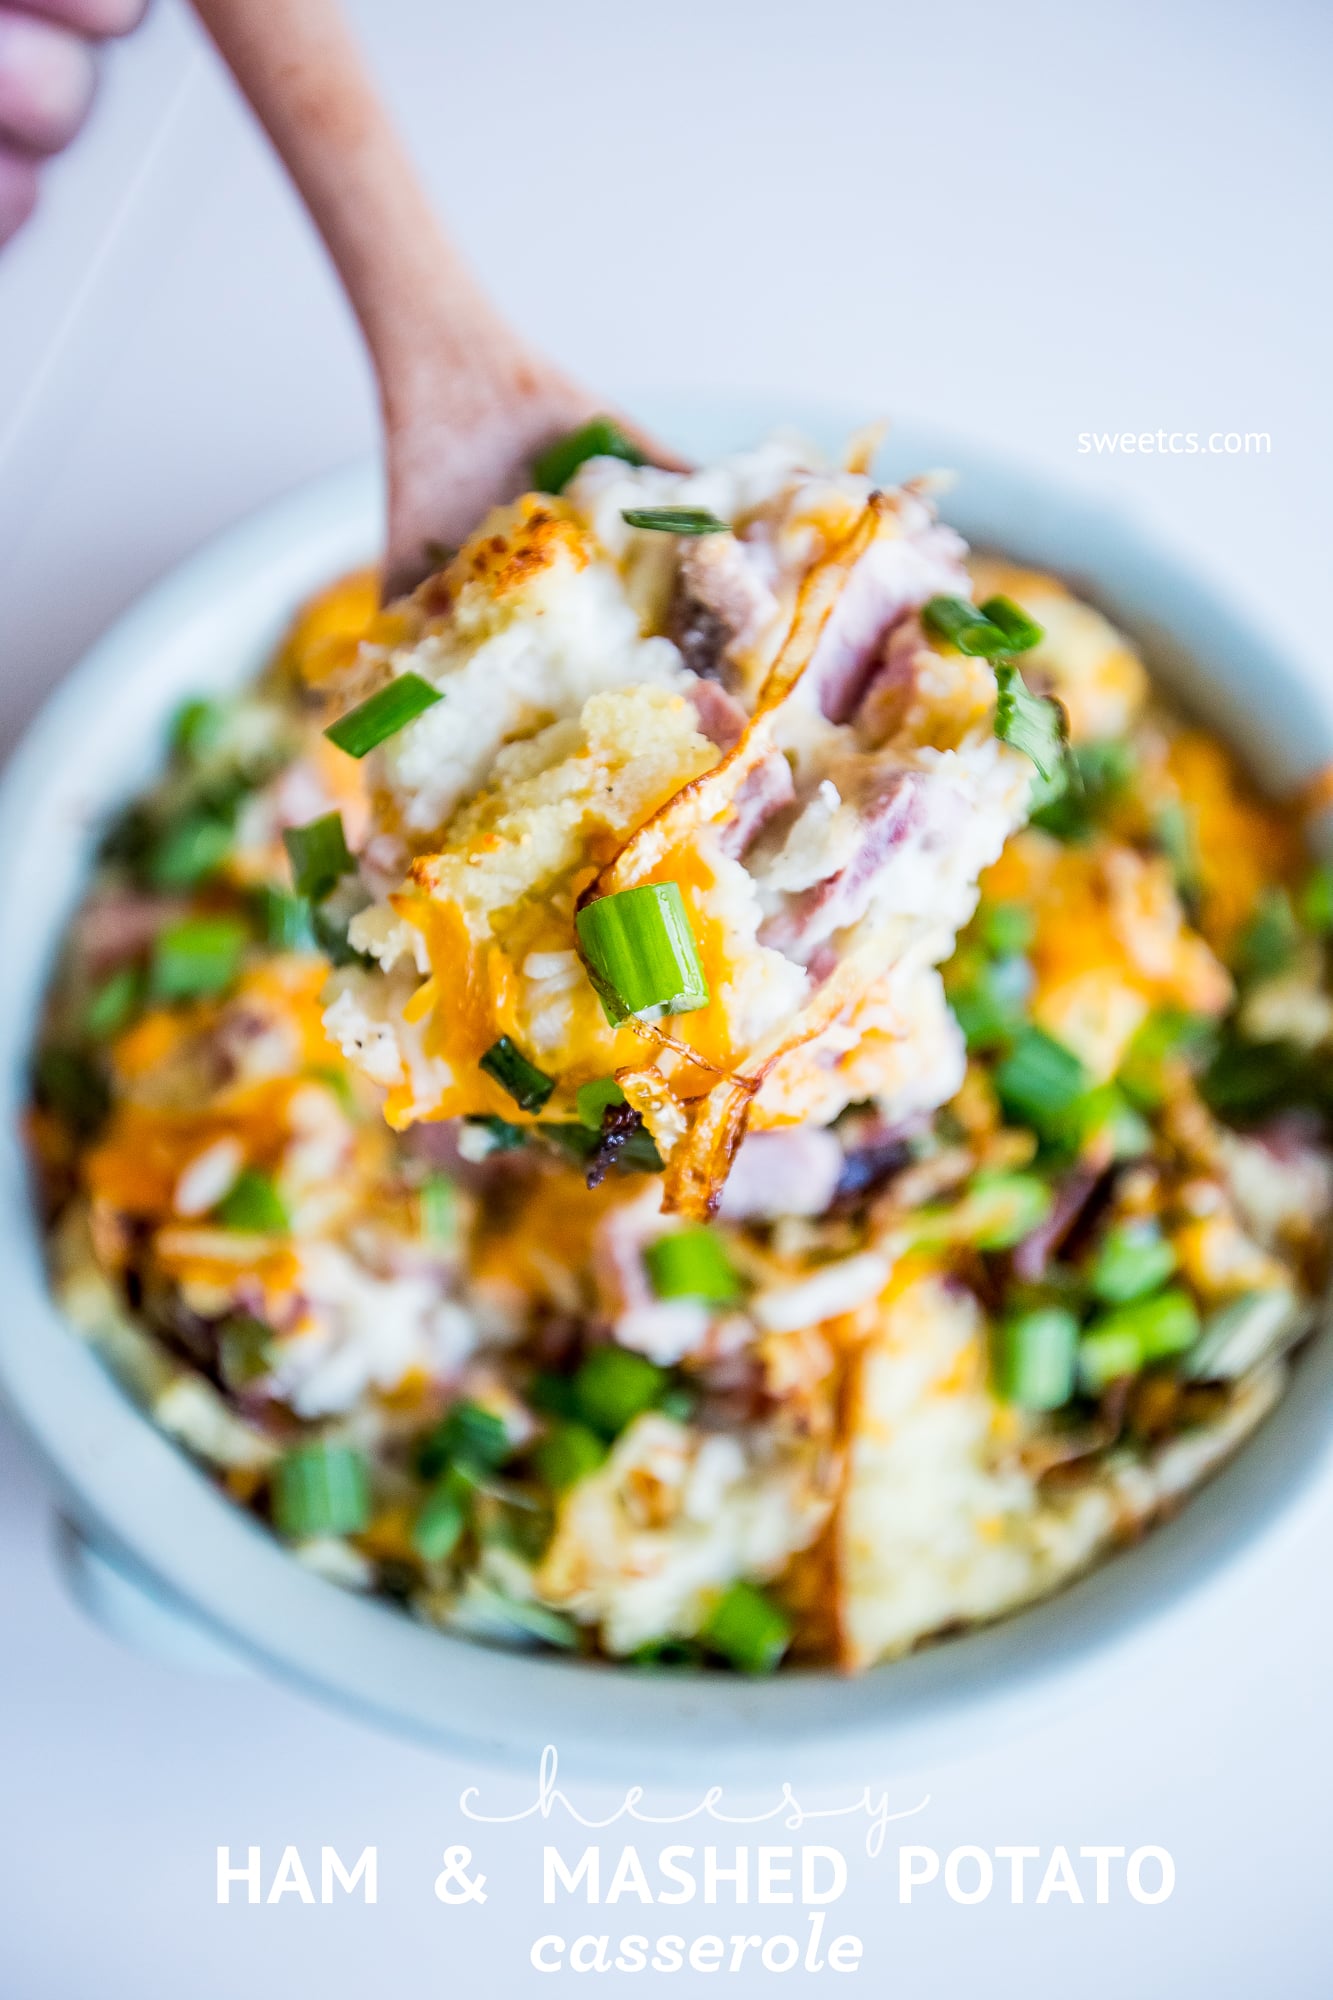 This cheesy ham and mashed potato casserole is so delicious and easy- such an awesome way to dress up leftovers!